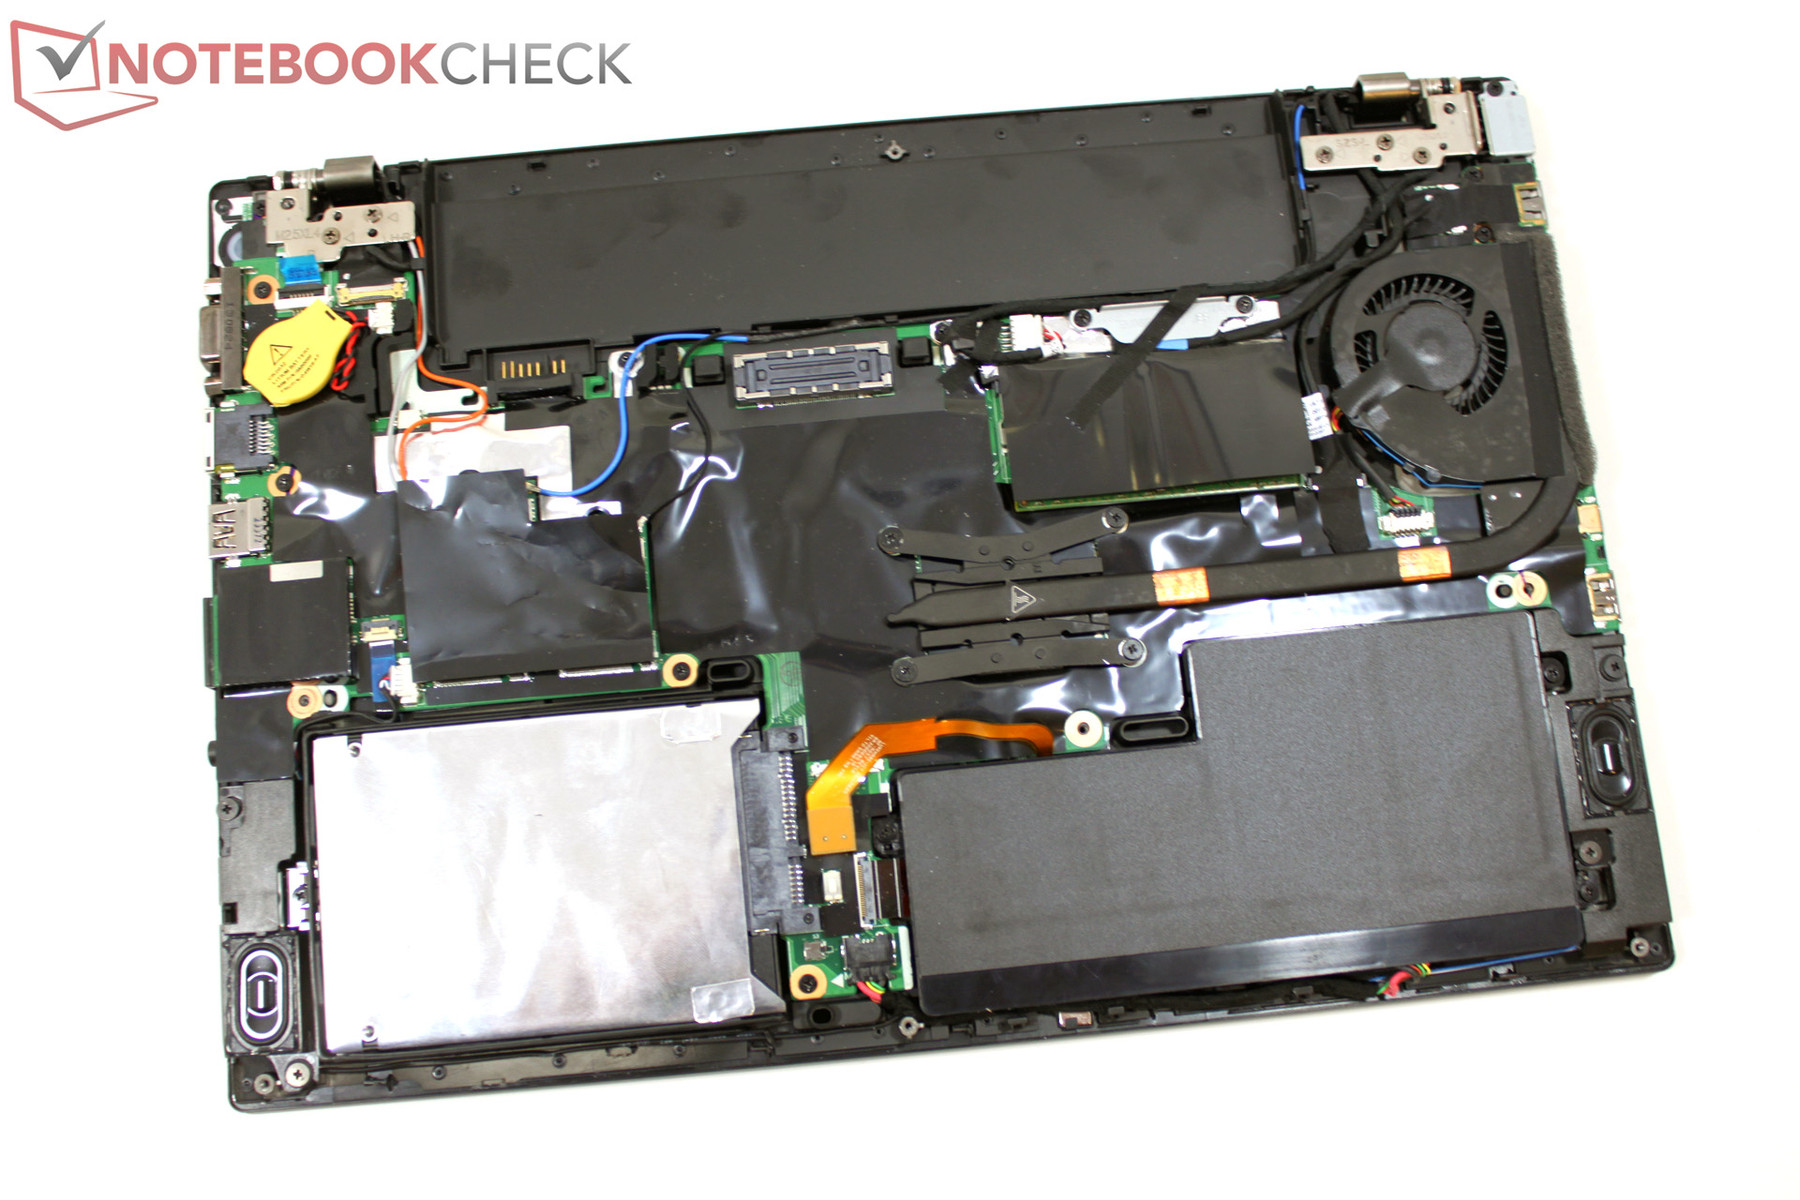 Review Update Lenovo ThinkPad T440s 20AQ0069GE - NotebookCheck.net